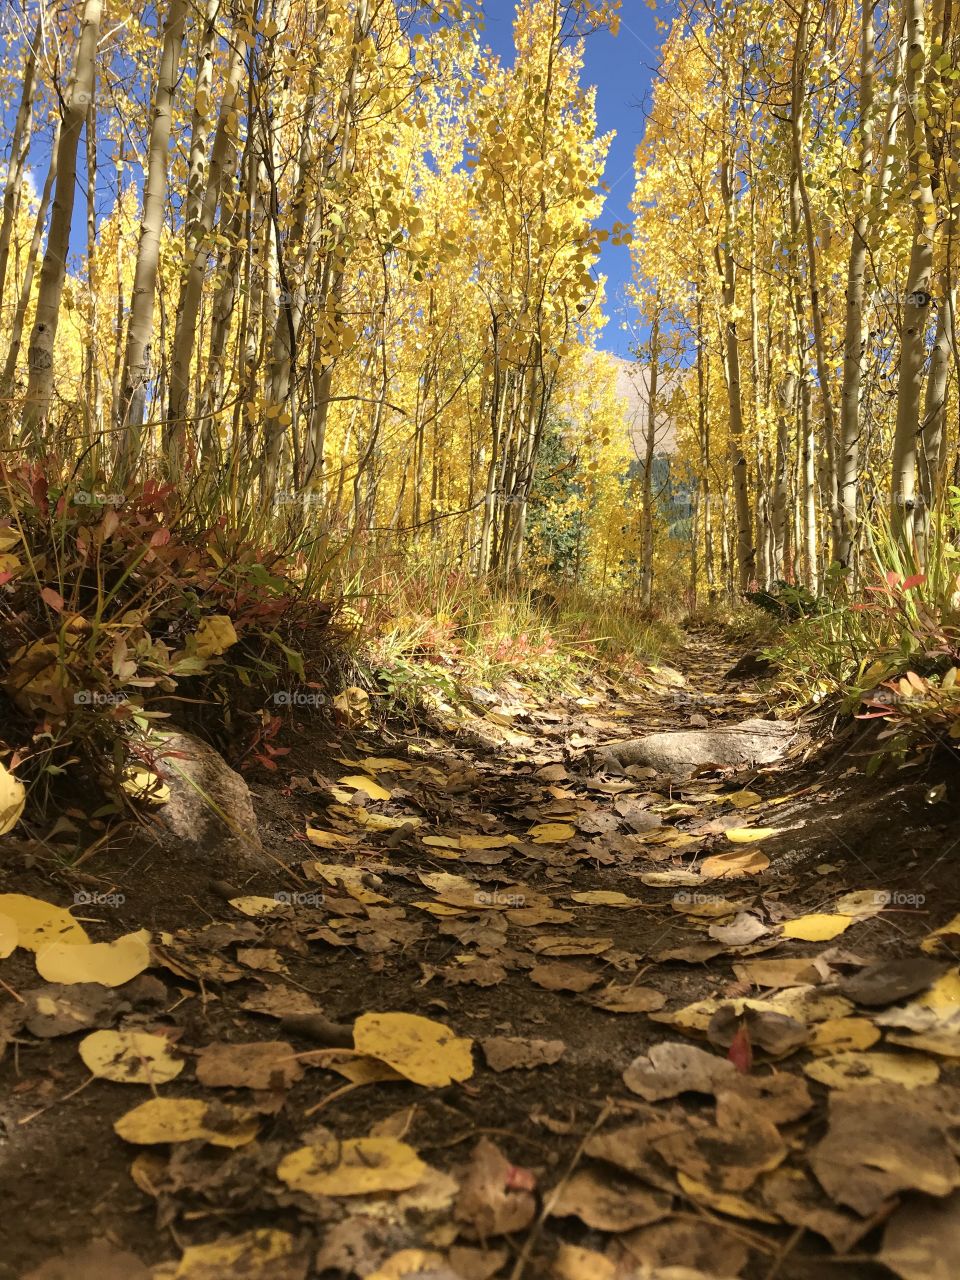 Aspen groove in the fall 